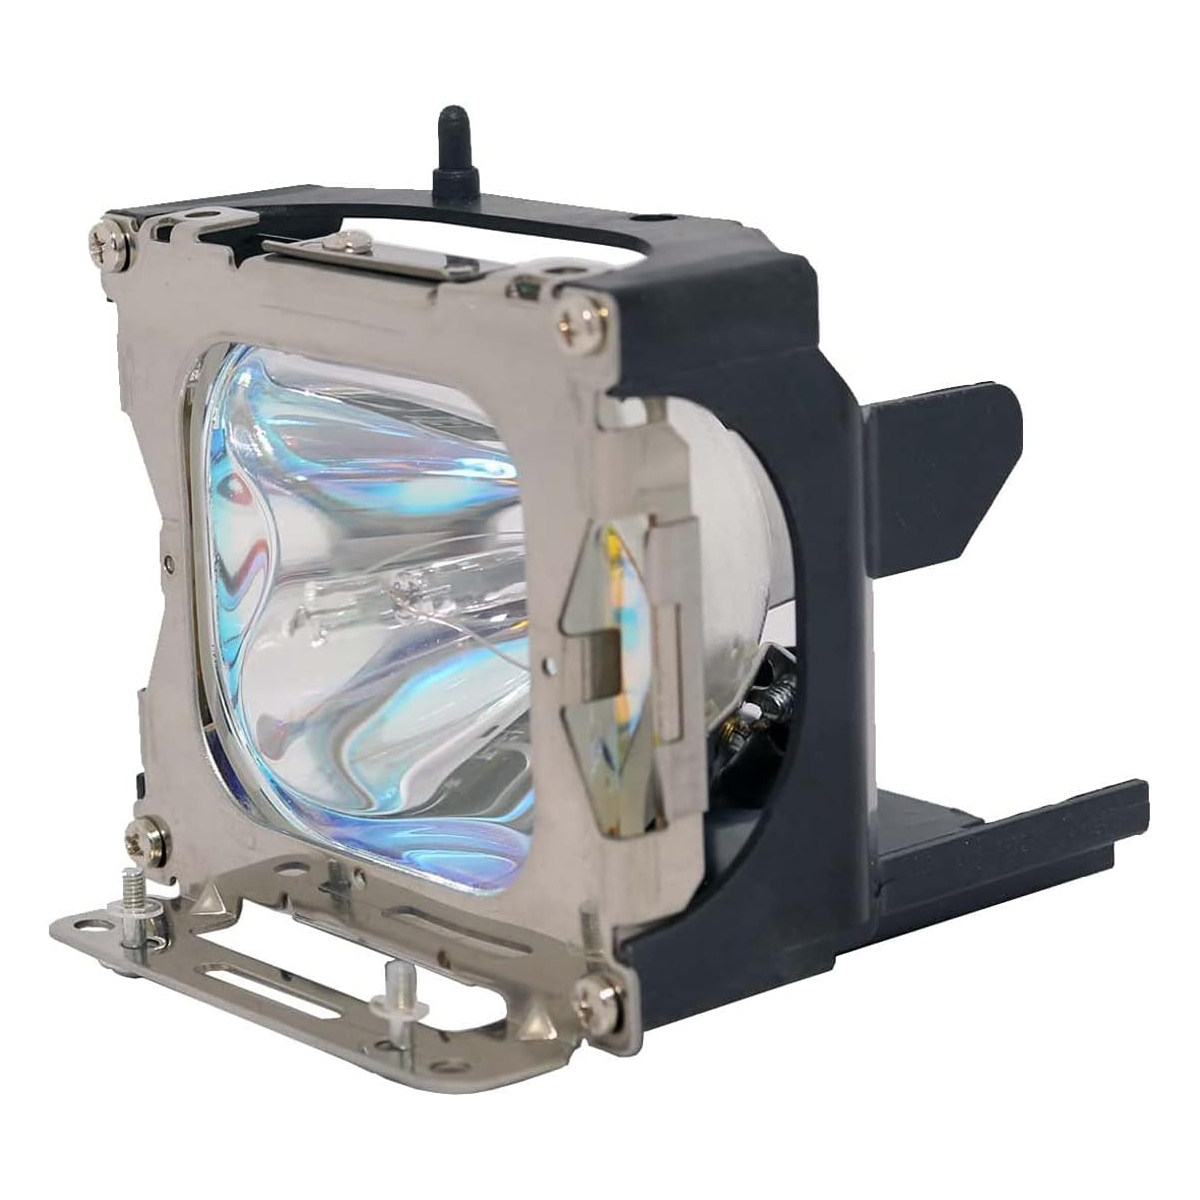 Replacement Projector lamp SLC650X For Seleco Projector